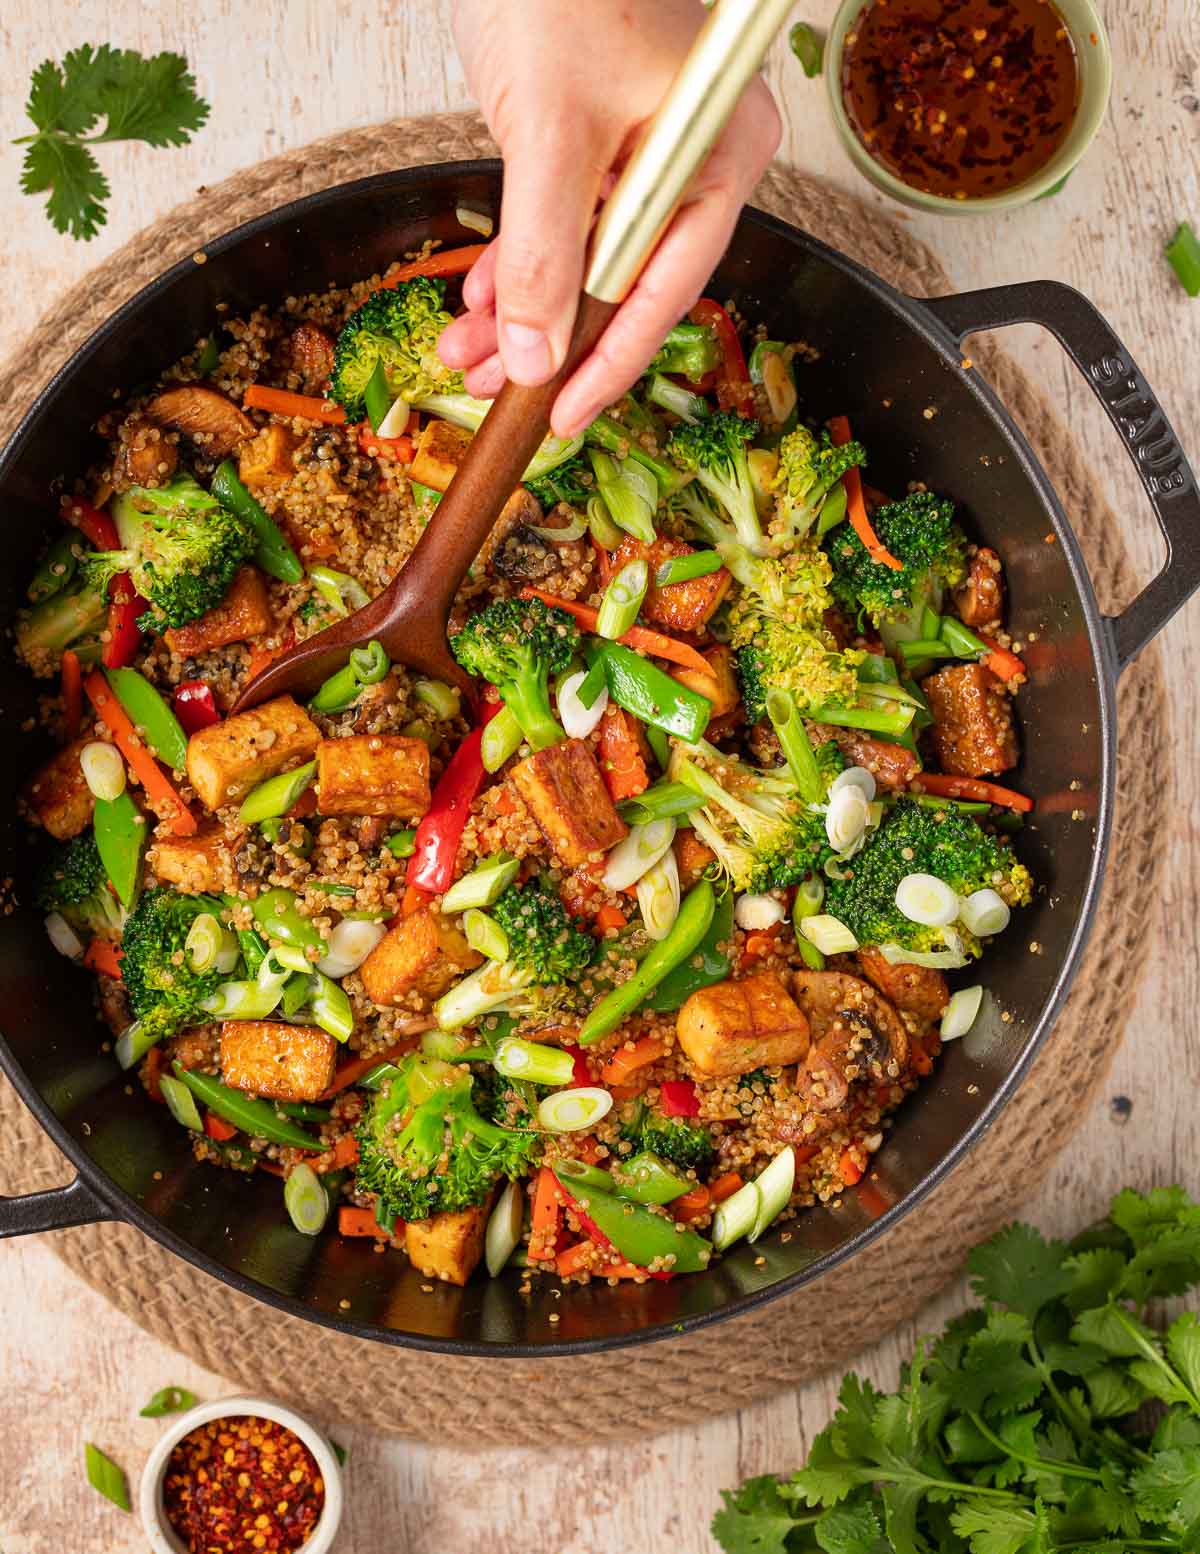 a handheld wooden spoon in a large pan of tofu quinoa stir fry